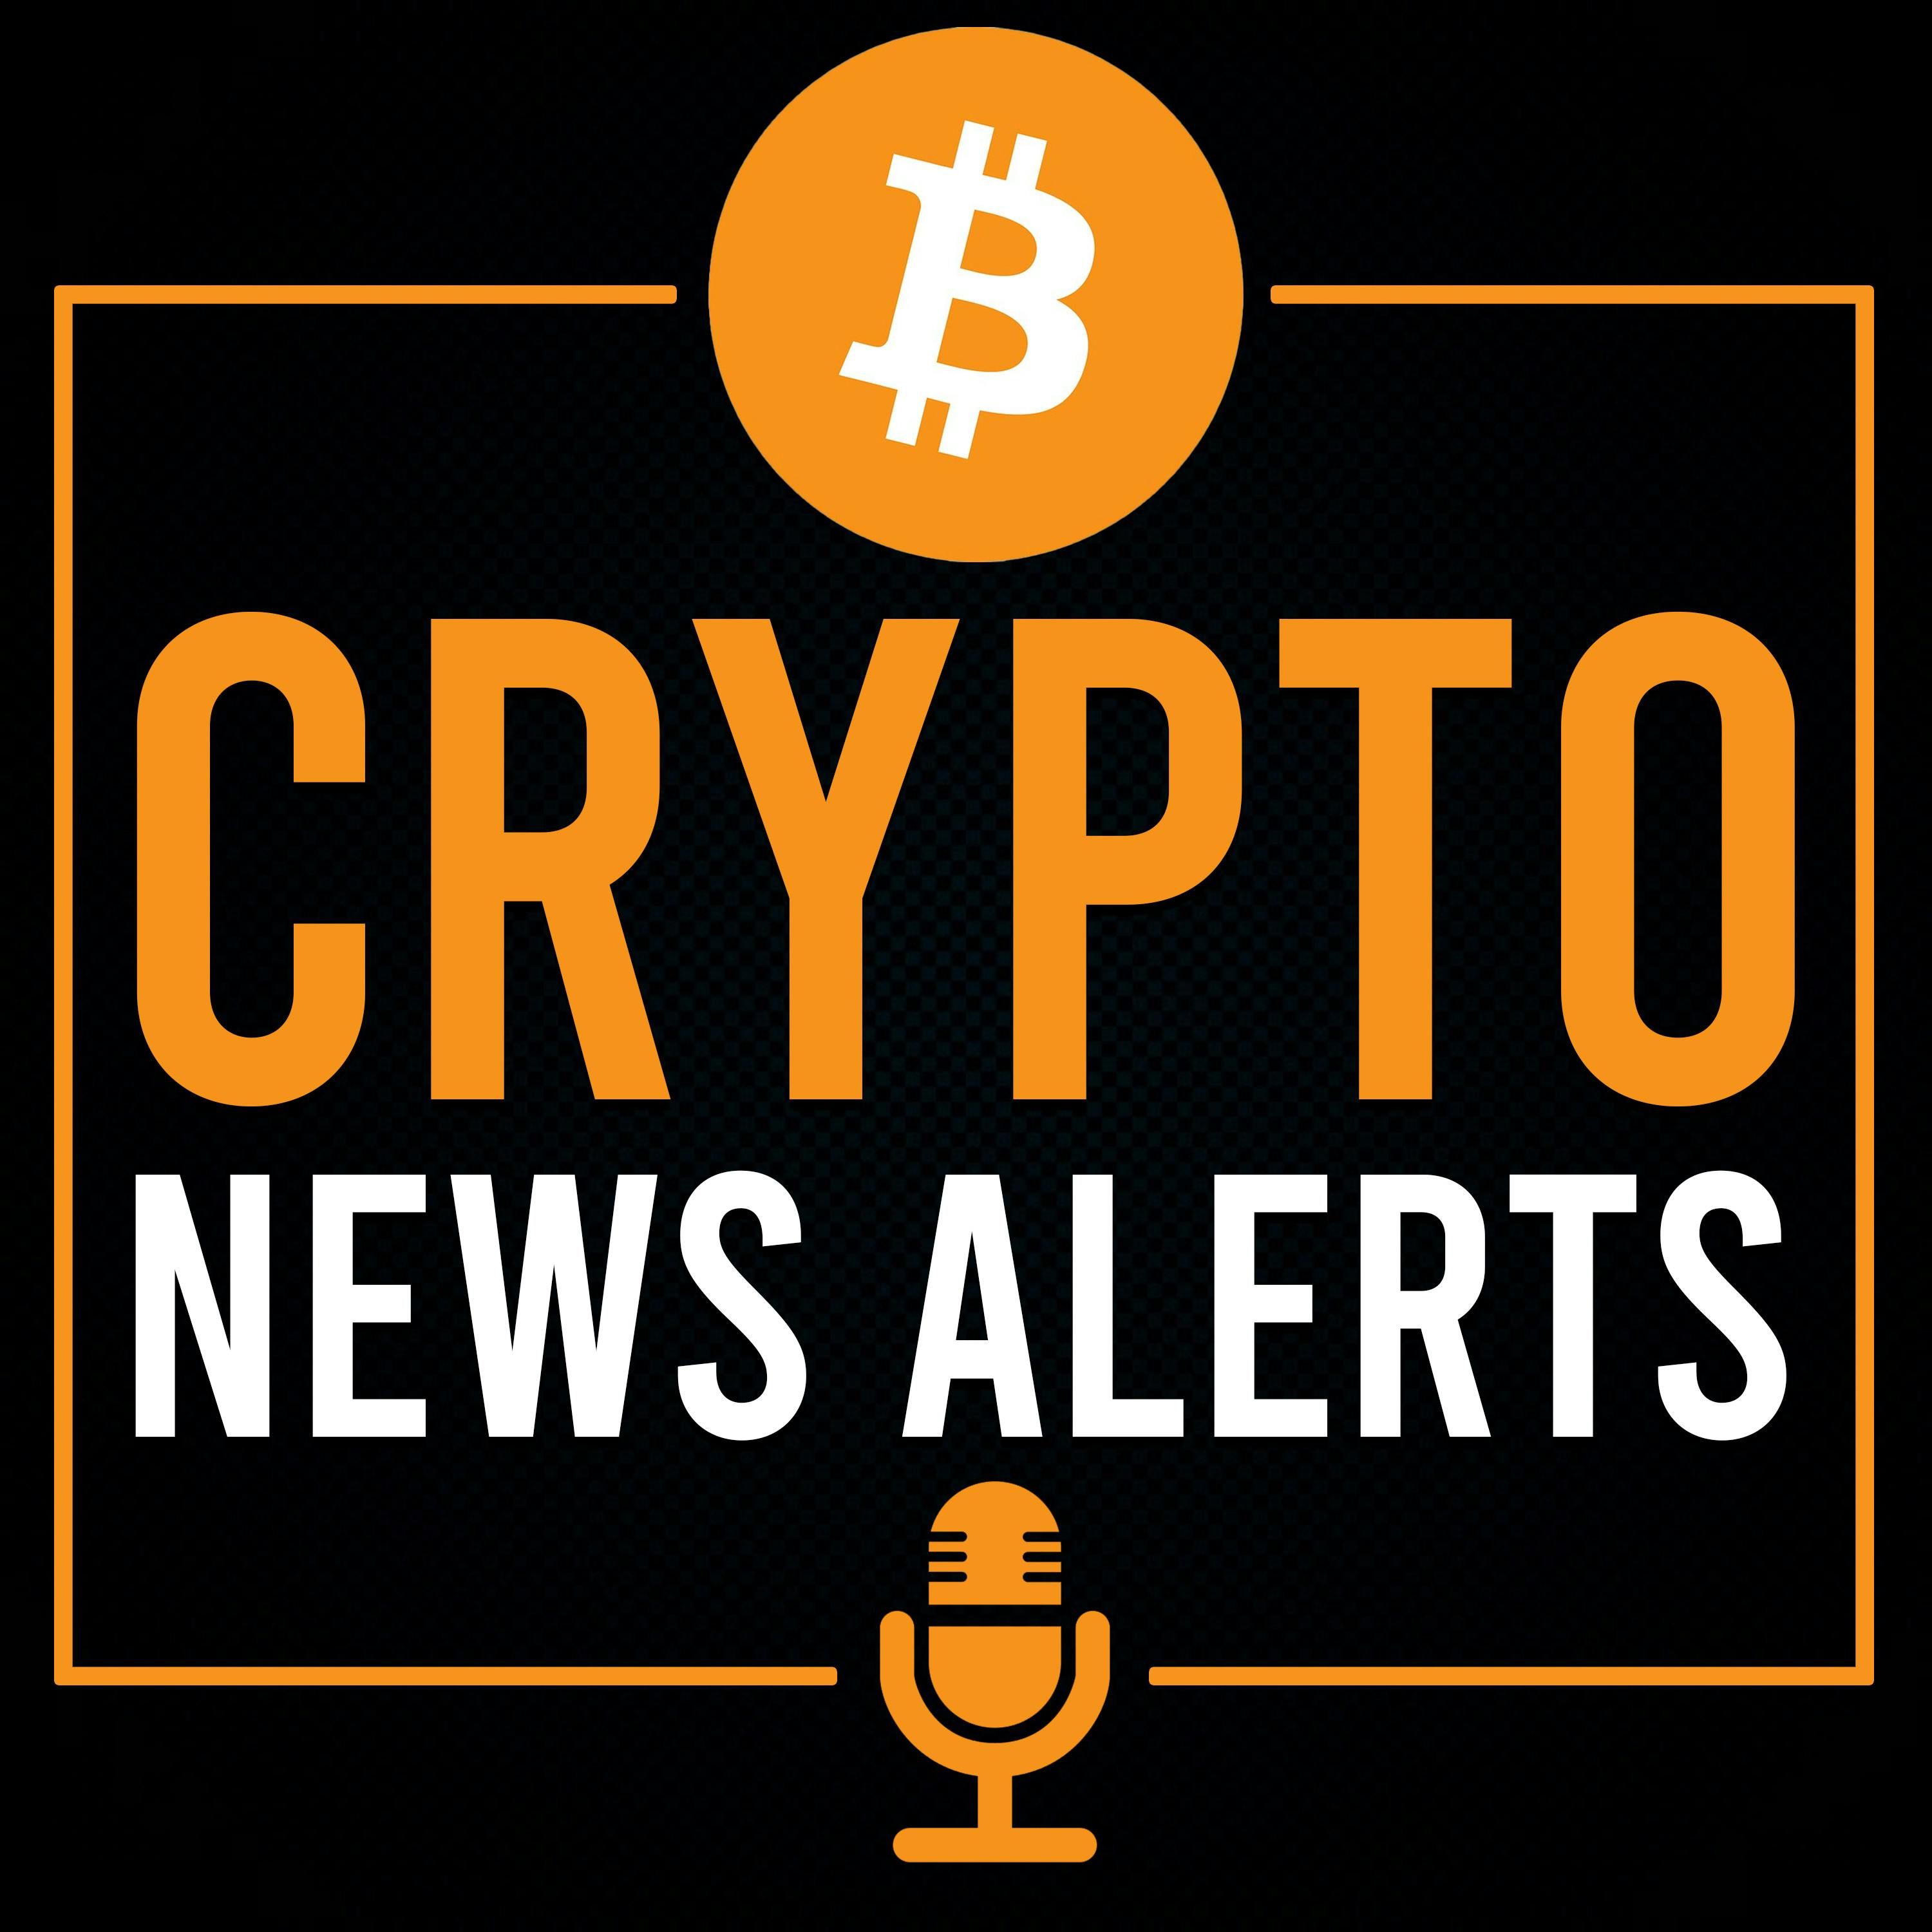 930: TOP CRYPTO ANALYST PREDICTS BITCOIN RALLY, SAYS MOMENTUM NOW SWINGING IN FAVOR OF BULLS!!